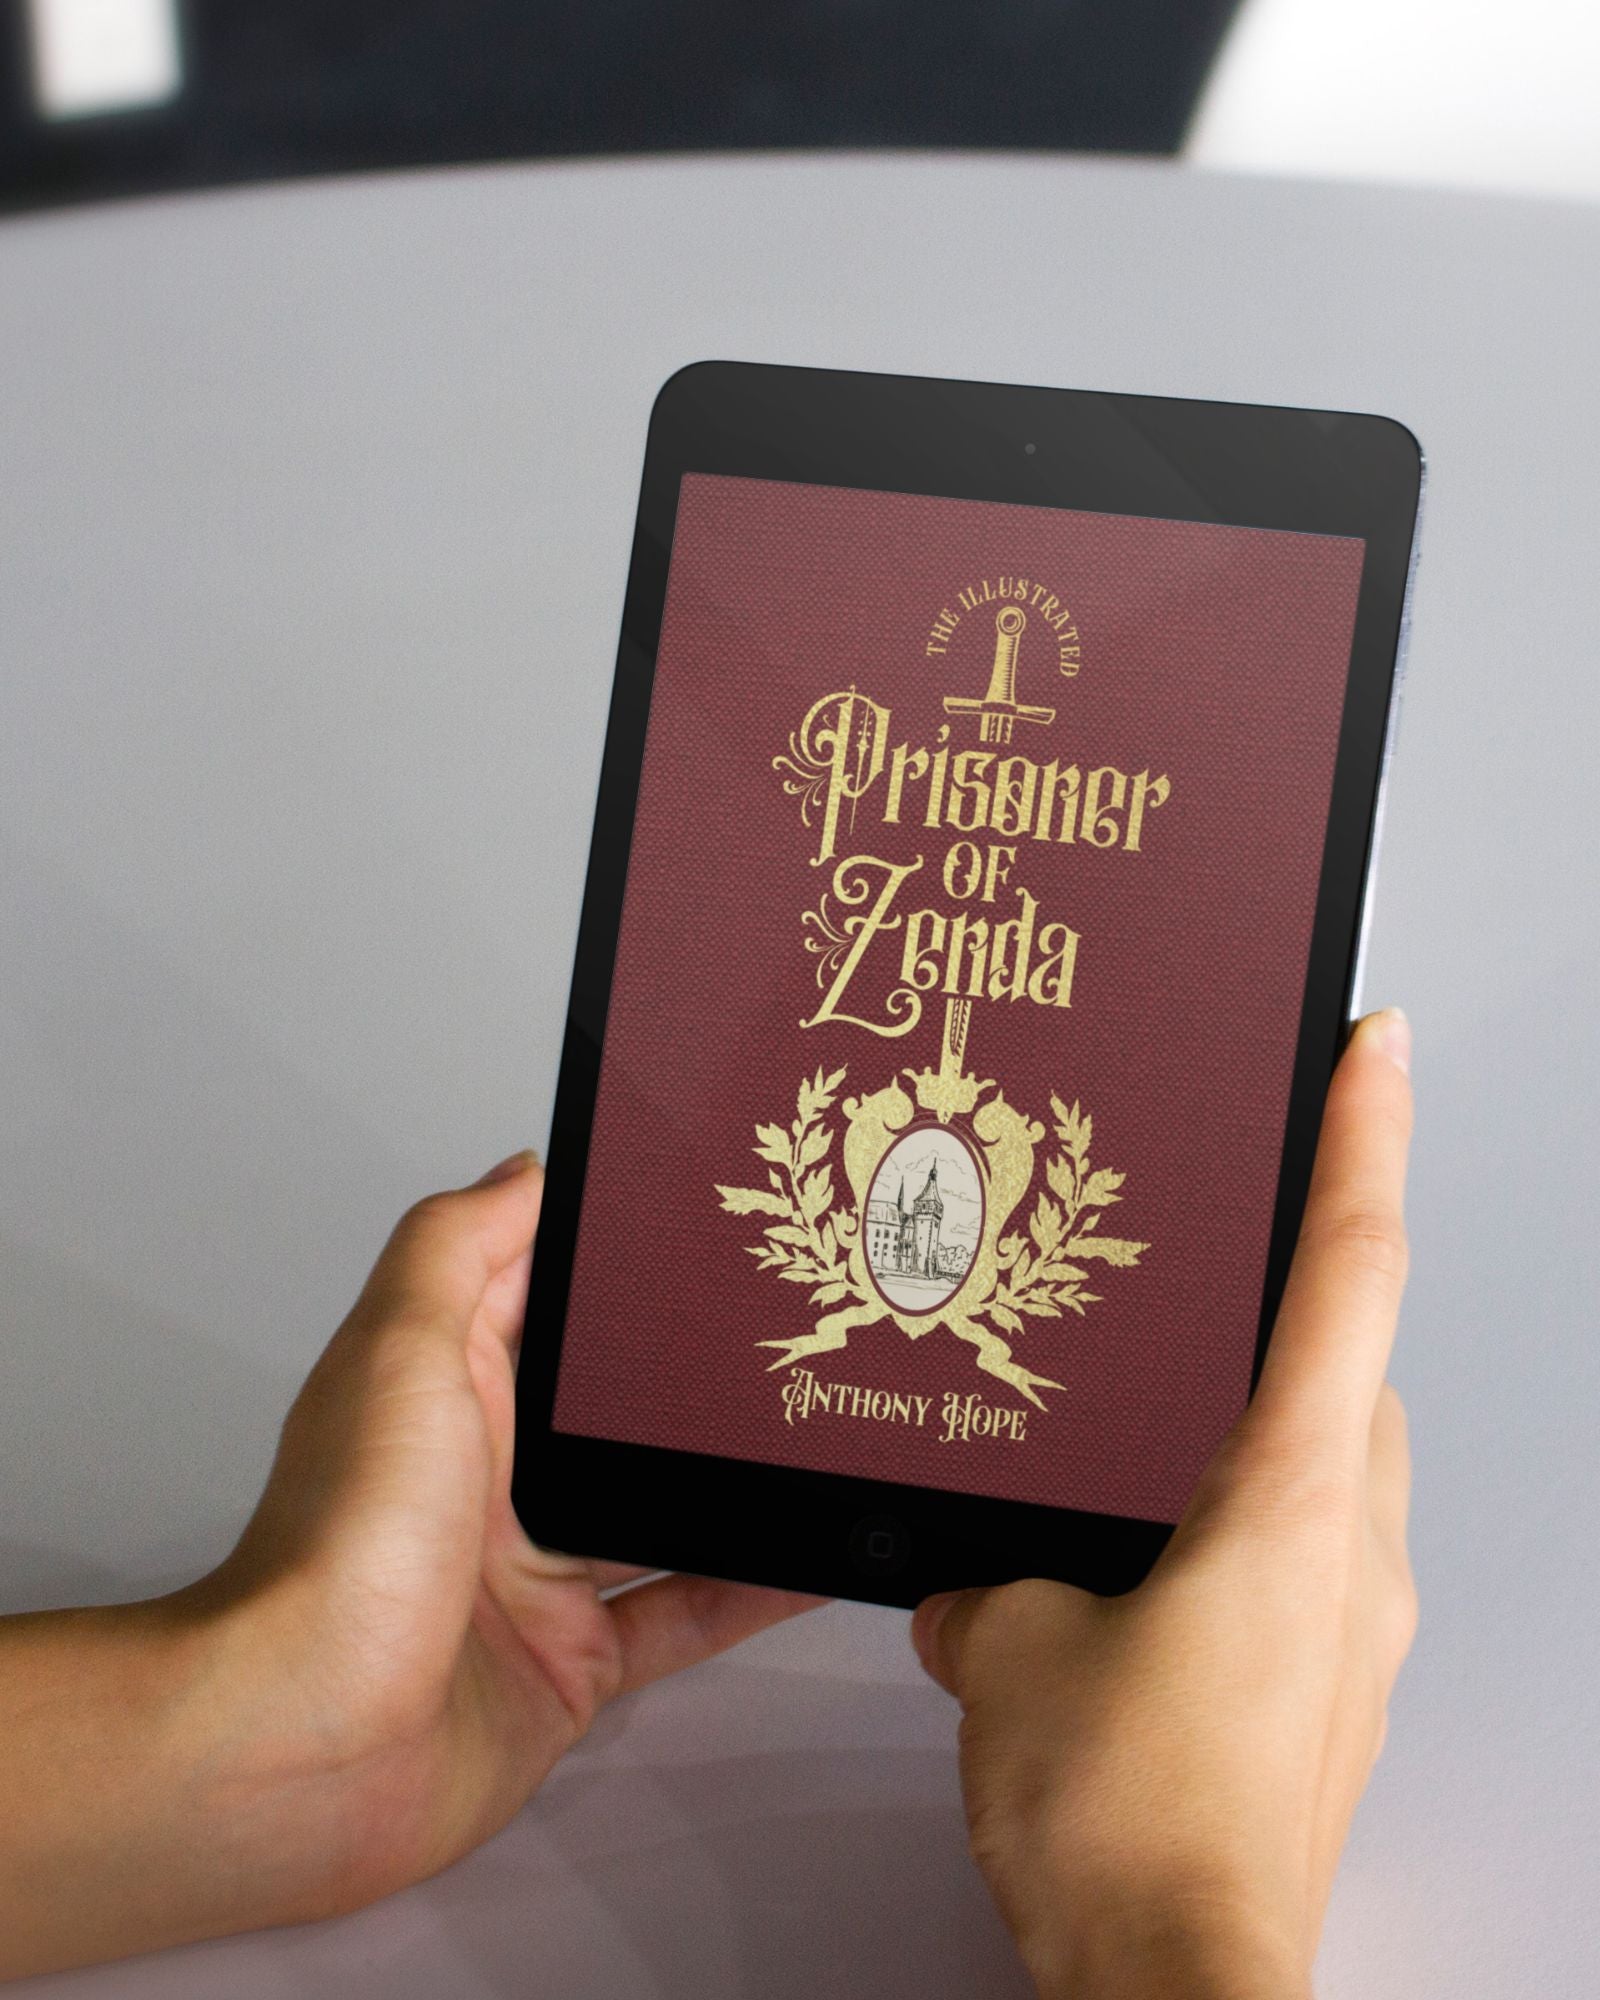 White hands hold a black tablet of the Burgundy and gold ebook "The Prisoner of Zenda" in front of a grey table.